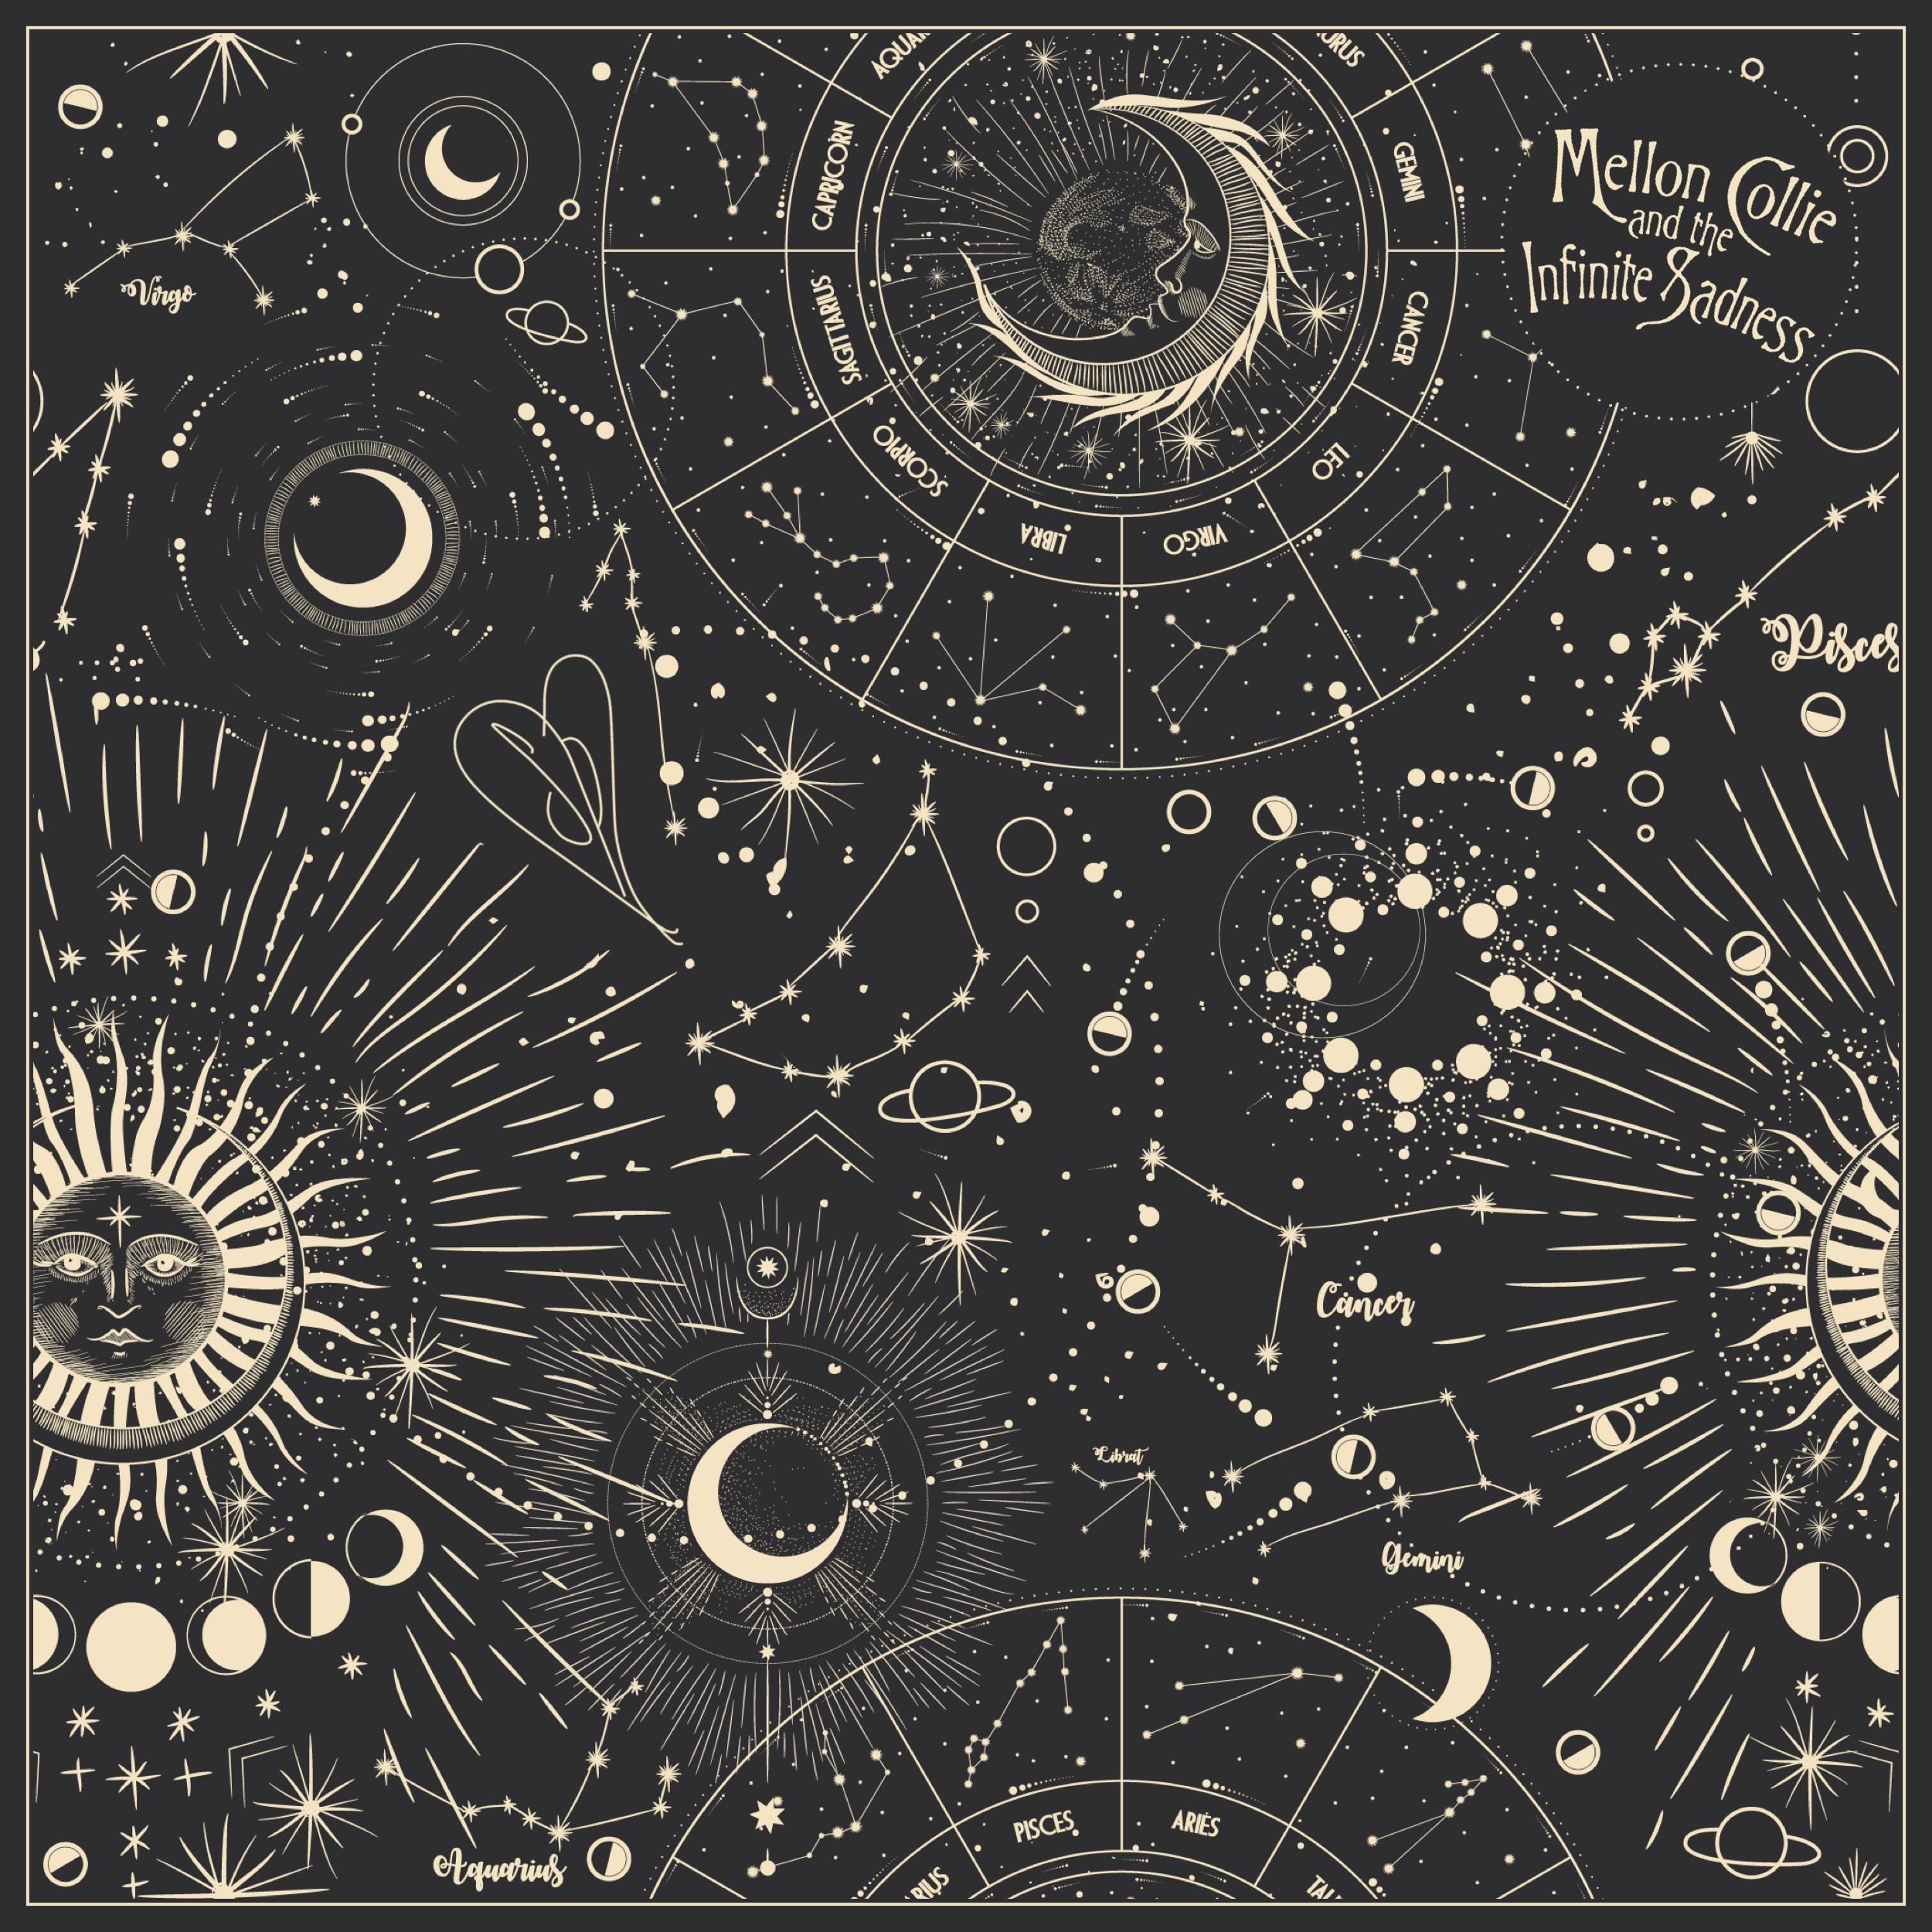 A black and white astrological chart with stars, planets - Witch